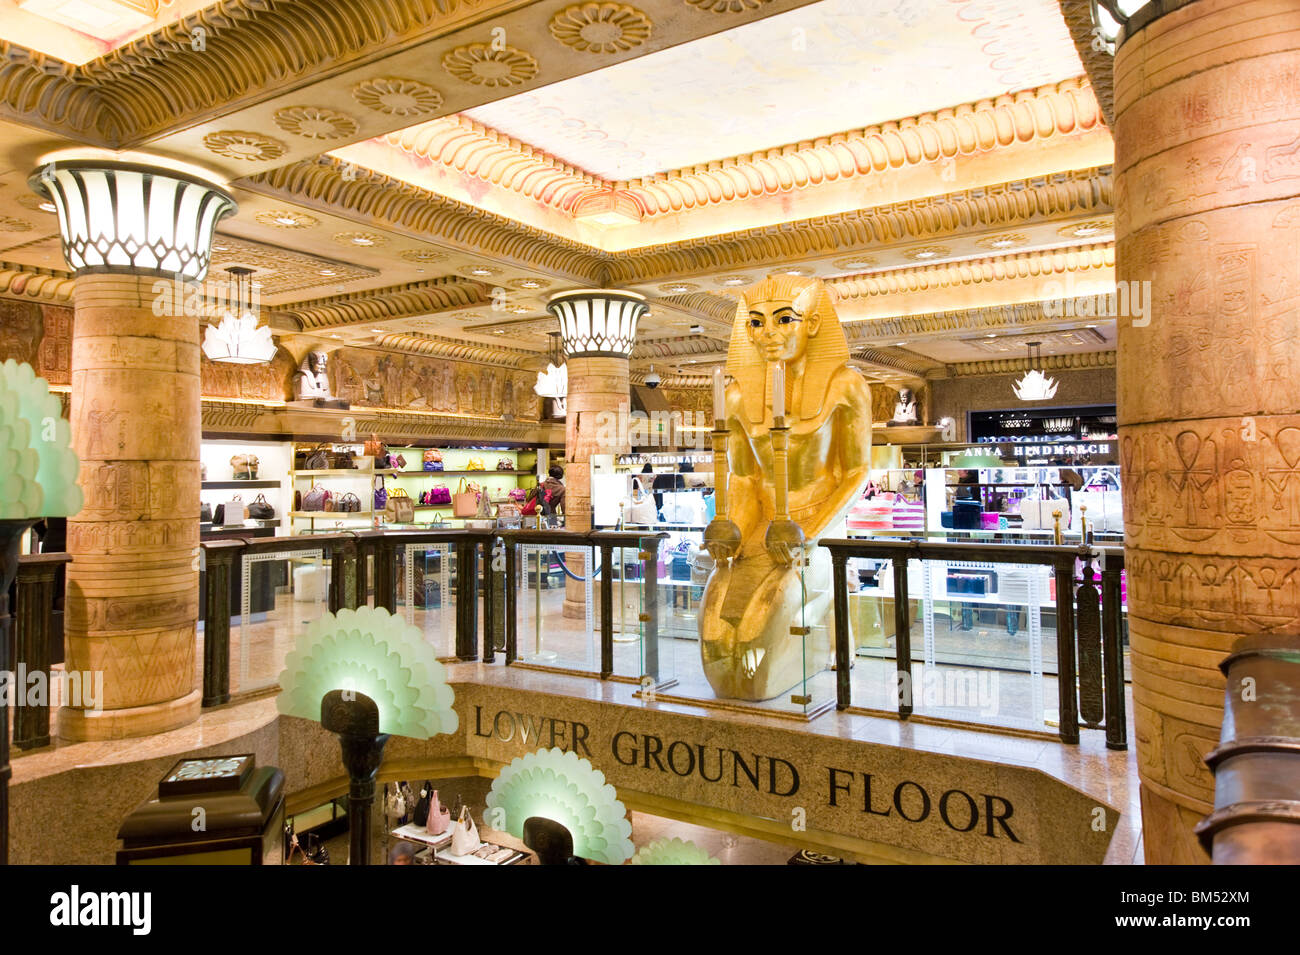 Harrods - The new Louis Vuitton store (Ground Floor). Photography